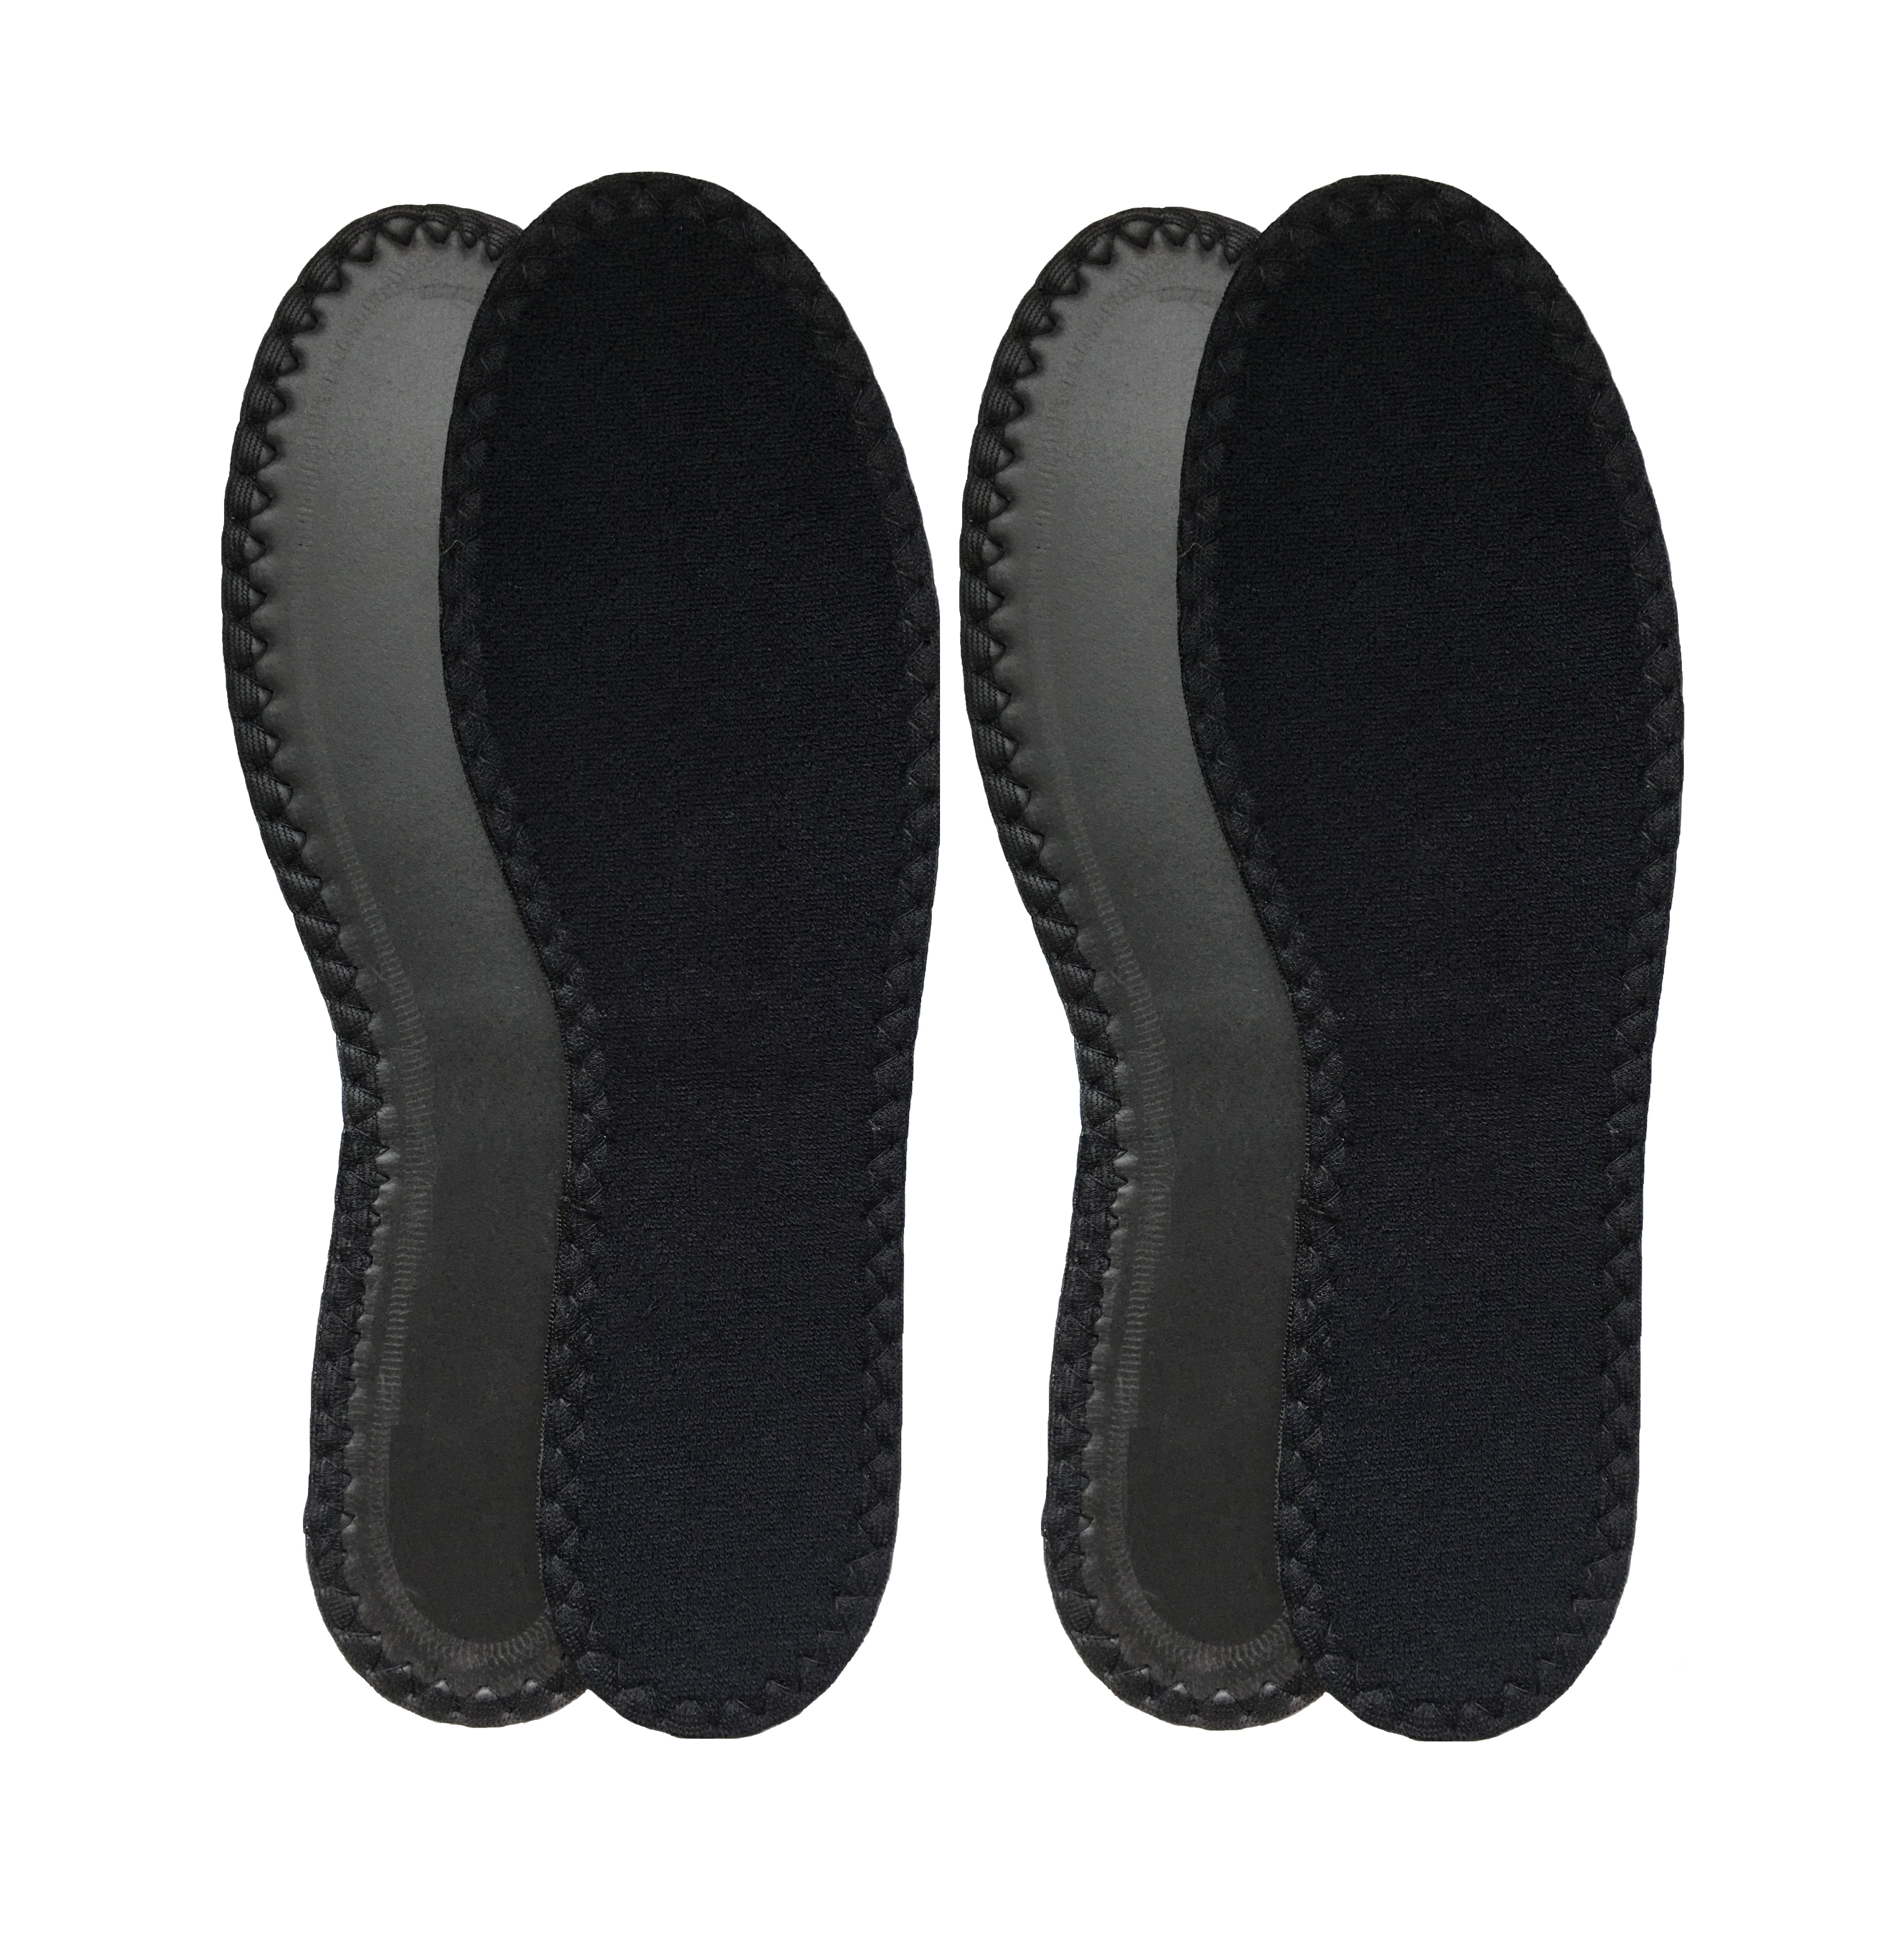 2-Pair Cotton Terry Cloth Barefoot 